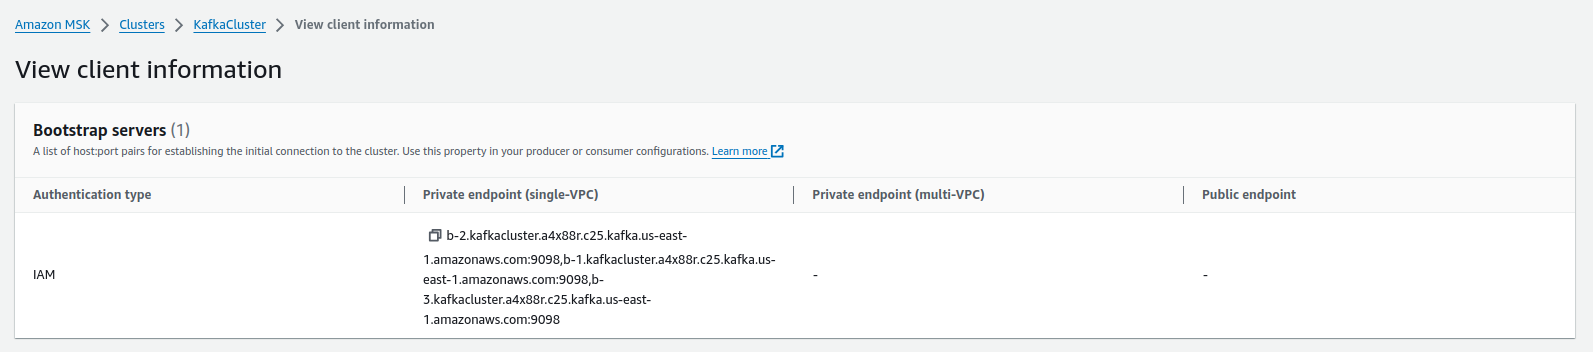 Private addresses of Kafka brokers (available within the AWS infrastructure)